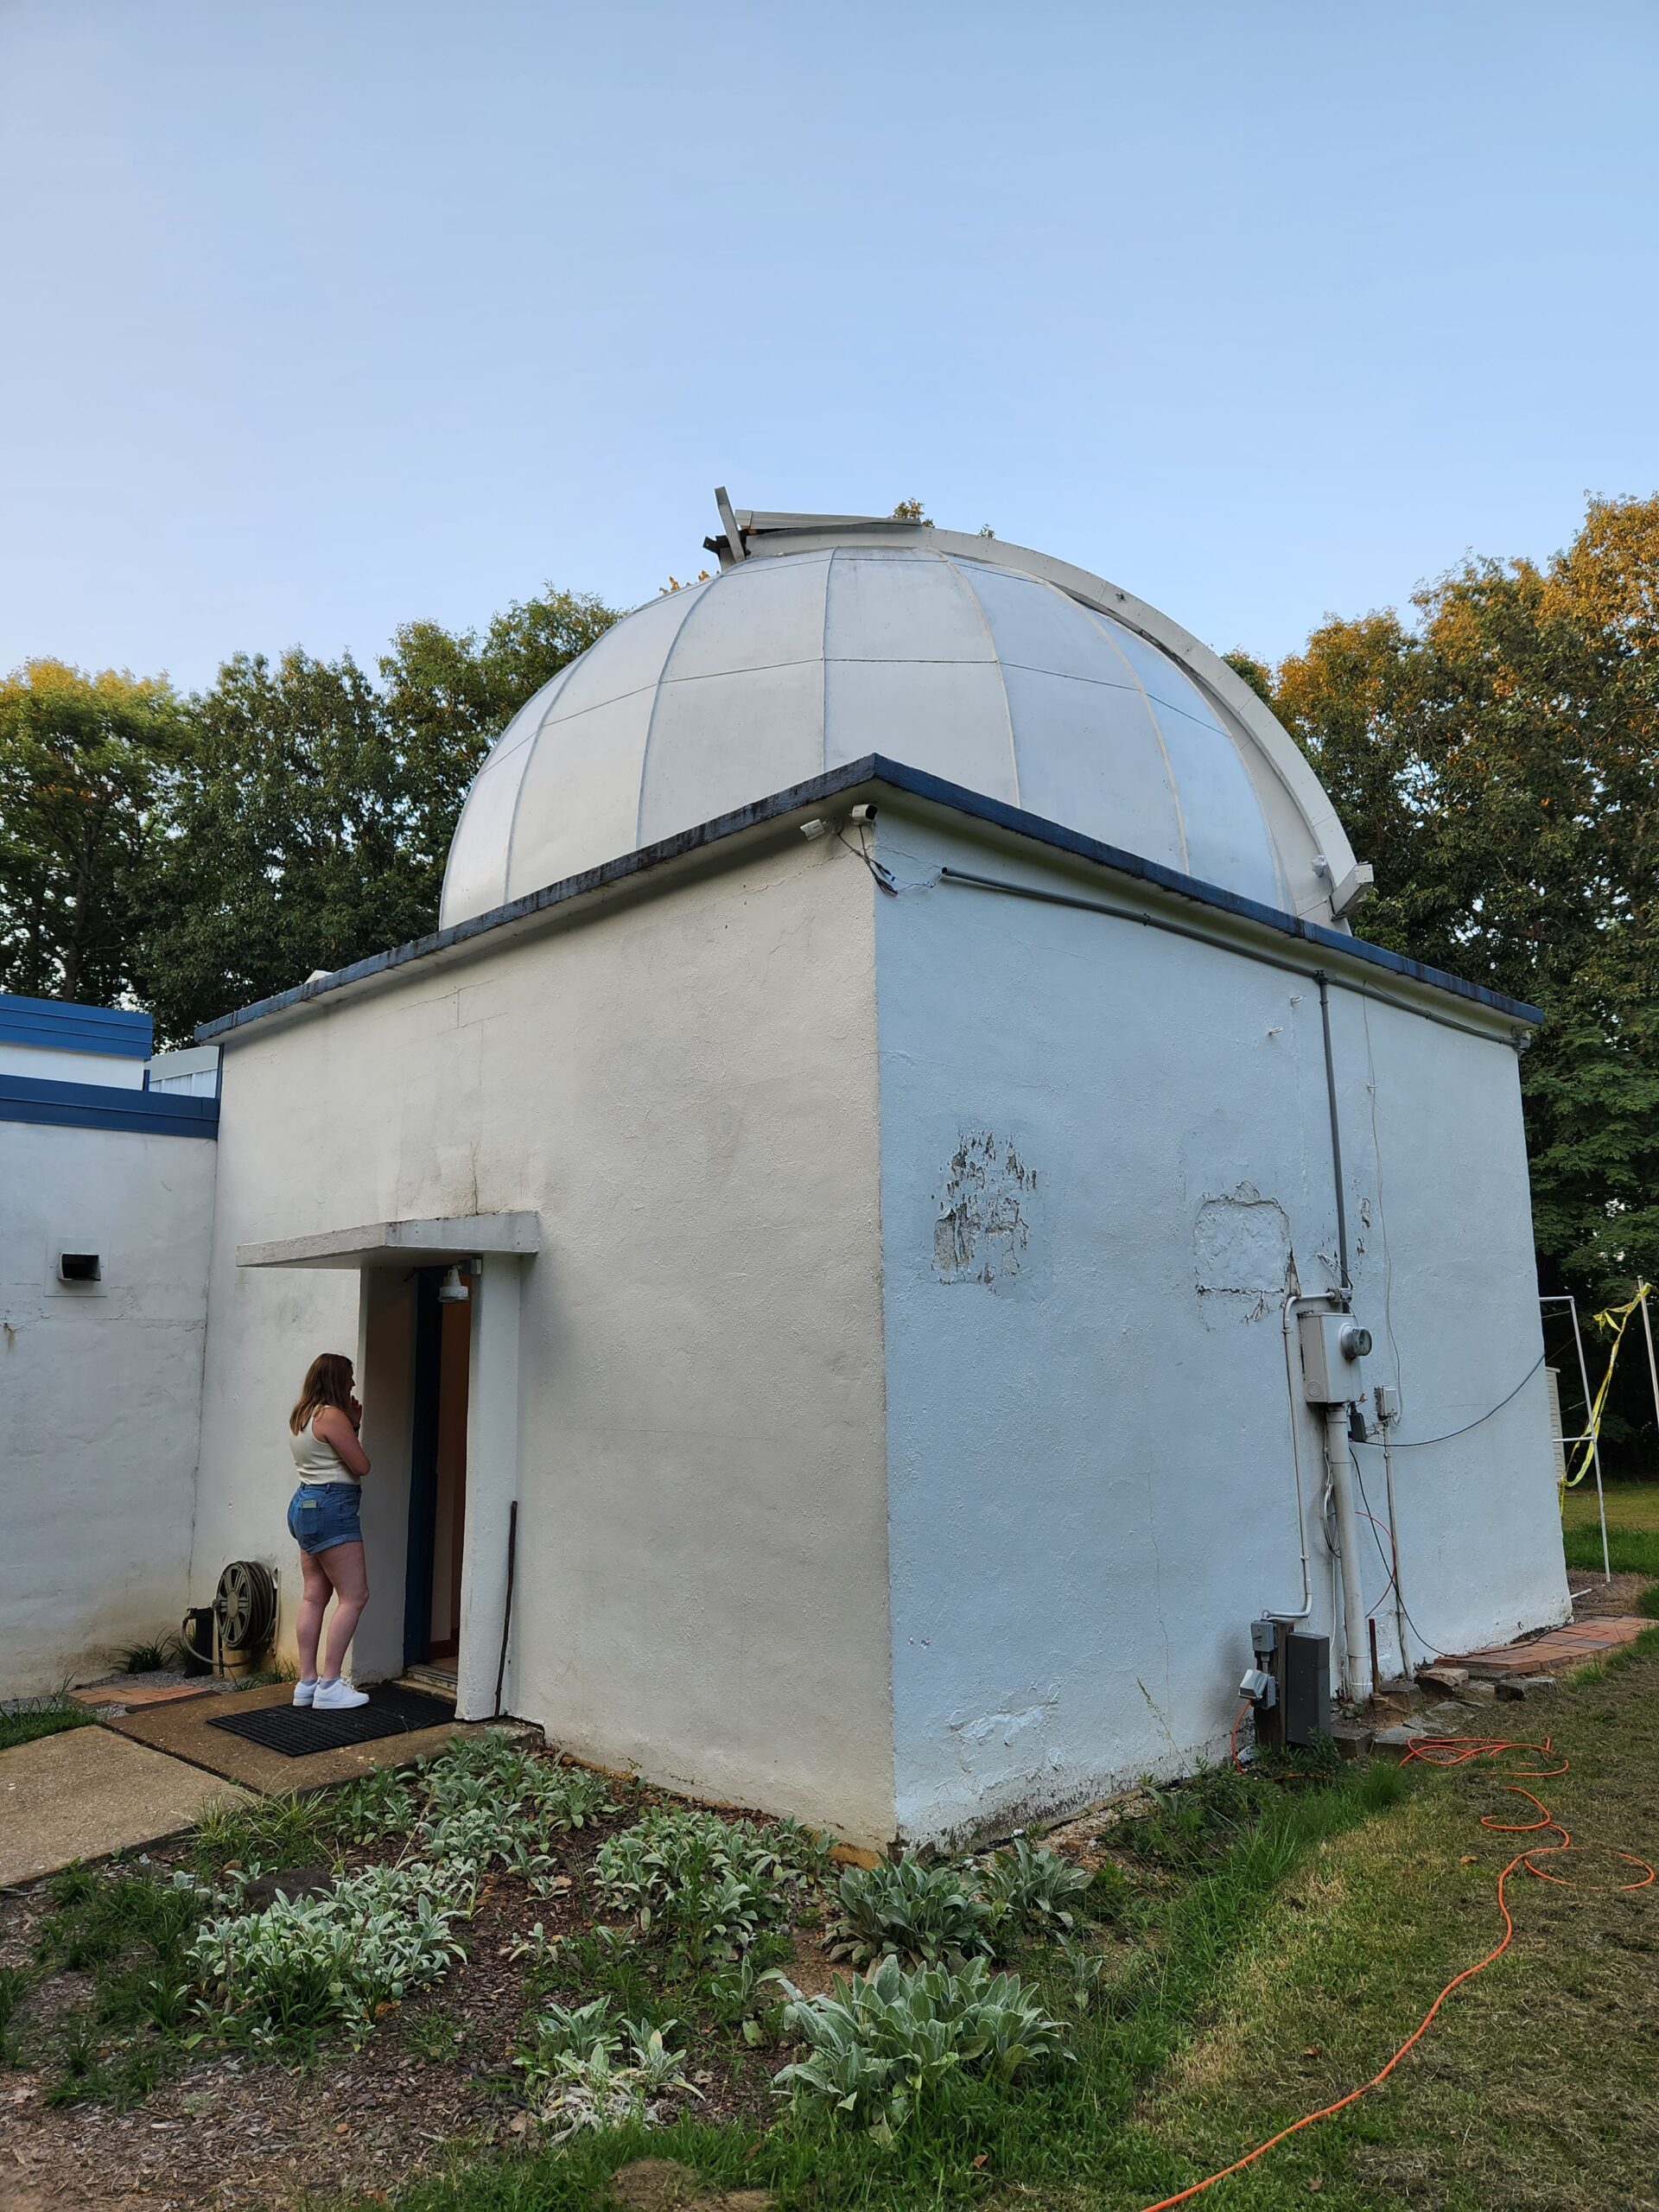 Swanson Observatory at the Von Braun Astronomical Society (VBAS) on the grounds of Monte Santo State Park in Huntsville, AL